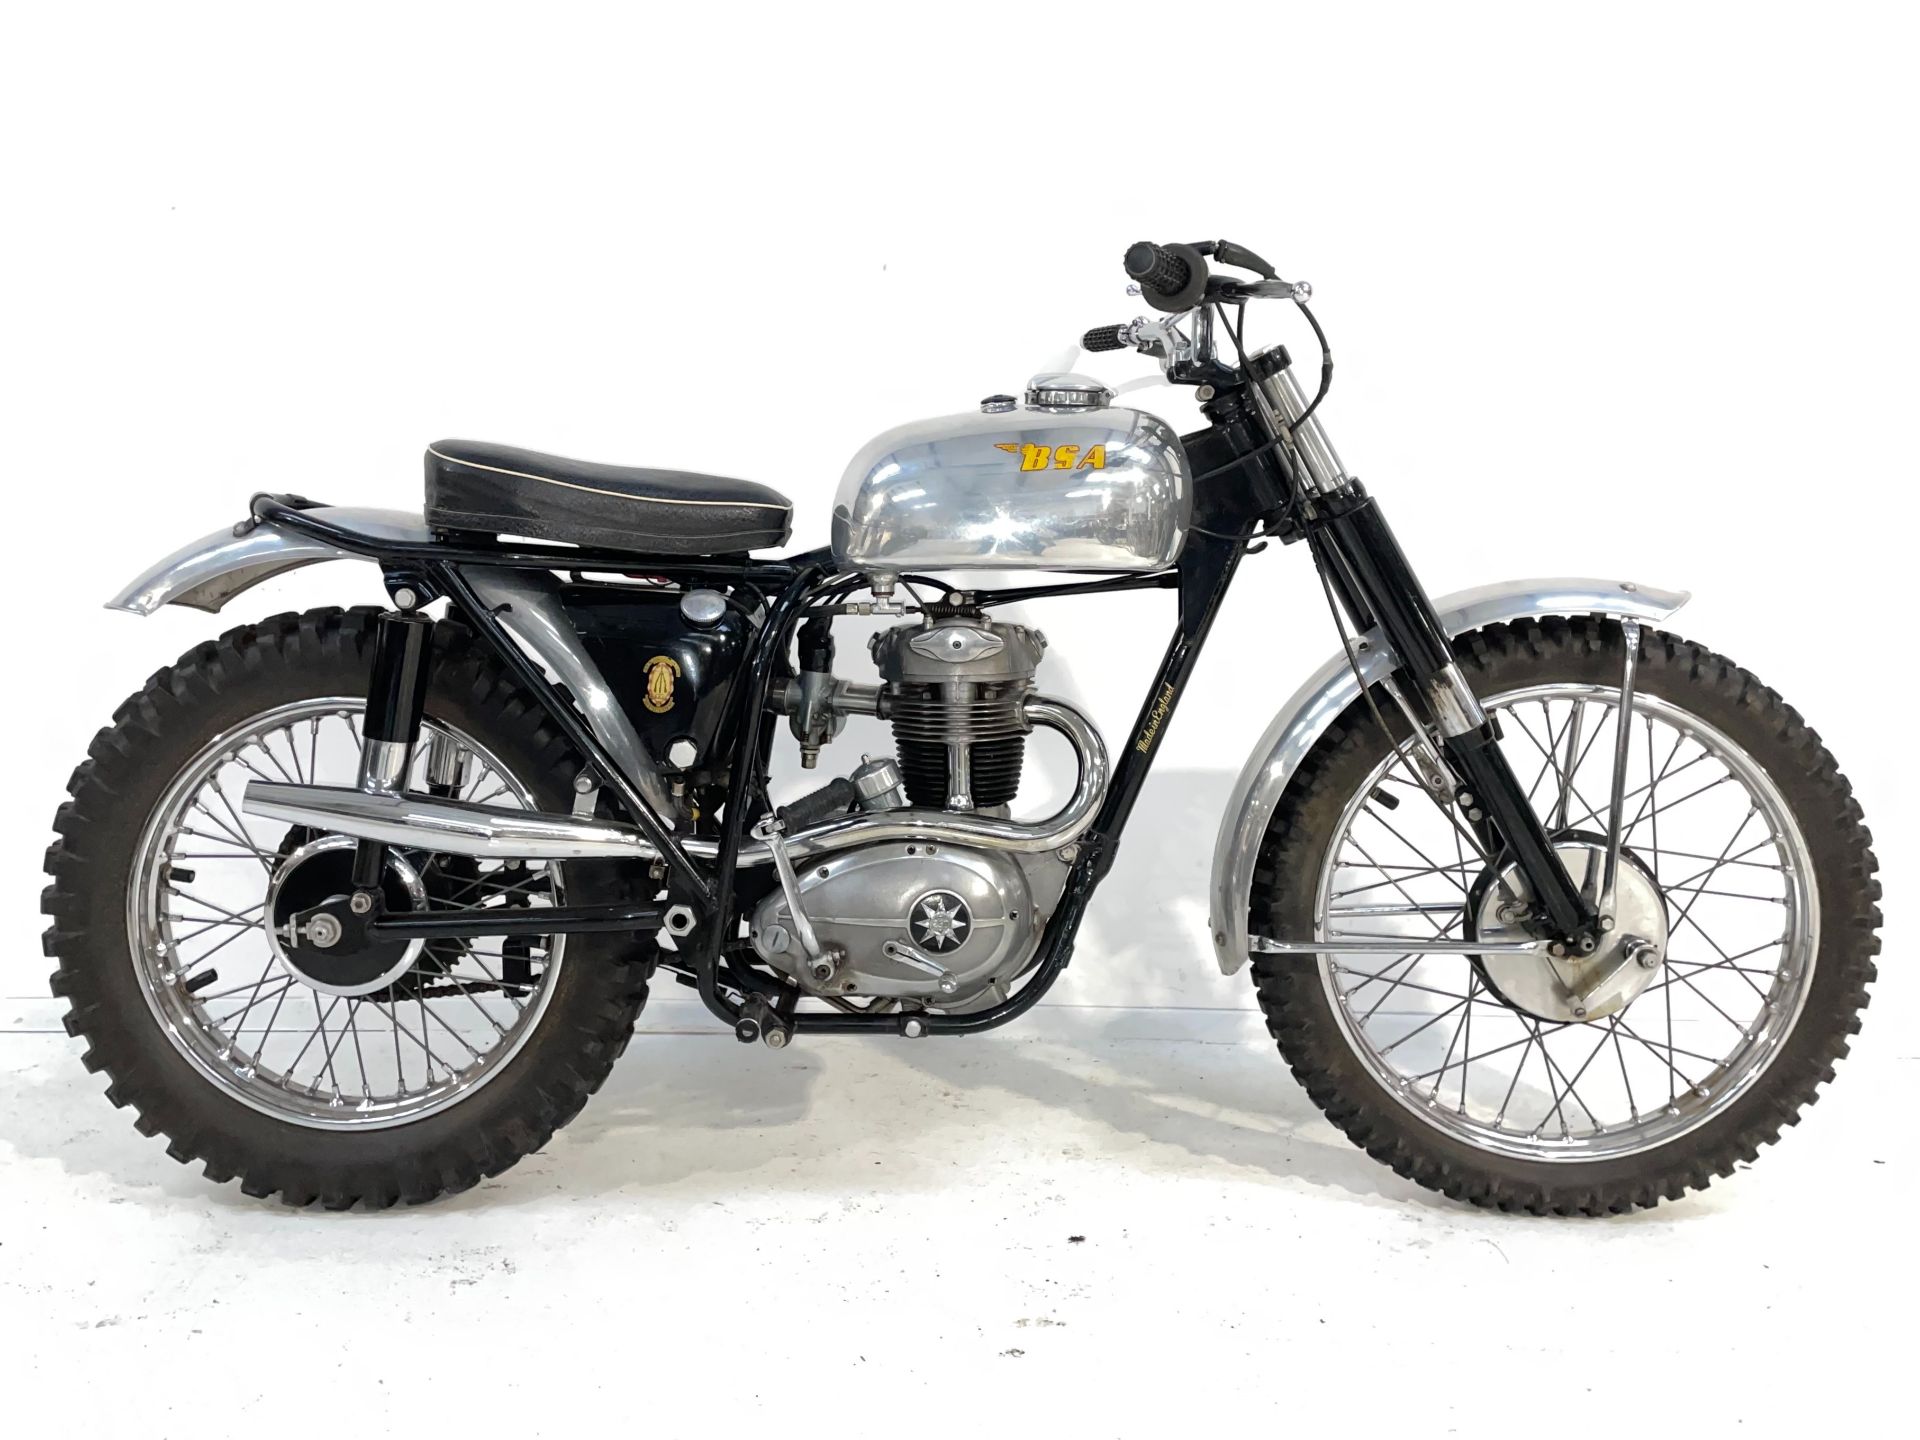 As used in the Belstaff photoshoot and advertising campaign featuring David Beckham, 1963 BSA 25...